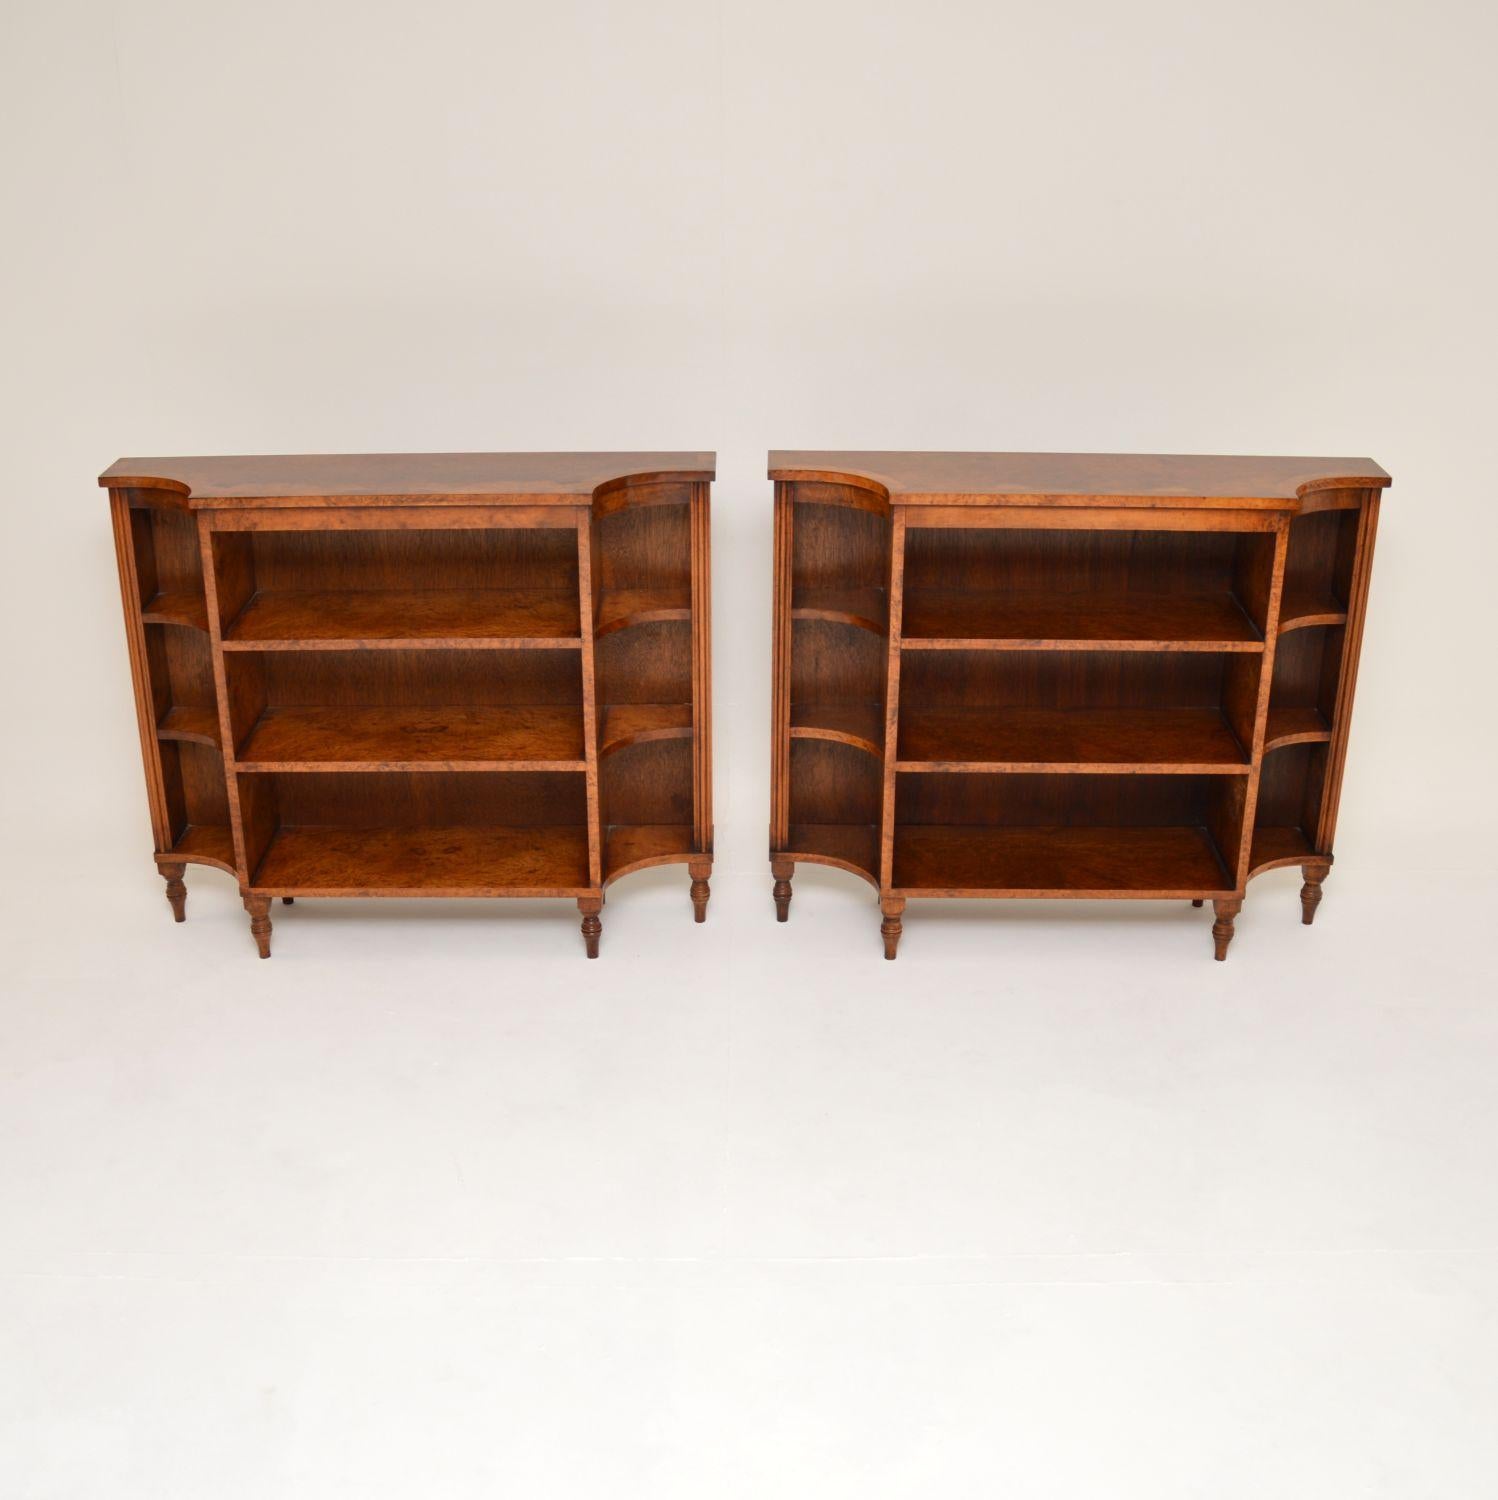 A stunning pair of antique burr walnut open bookcases. They were made in England, they date from around the 1920-30’s.

The quality is outstanding and they are a very useful size. Each has beautiful burr walnut grain patterns, inside and out, with a